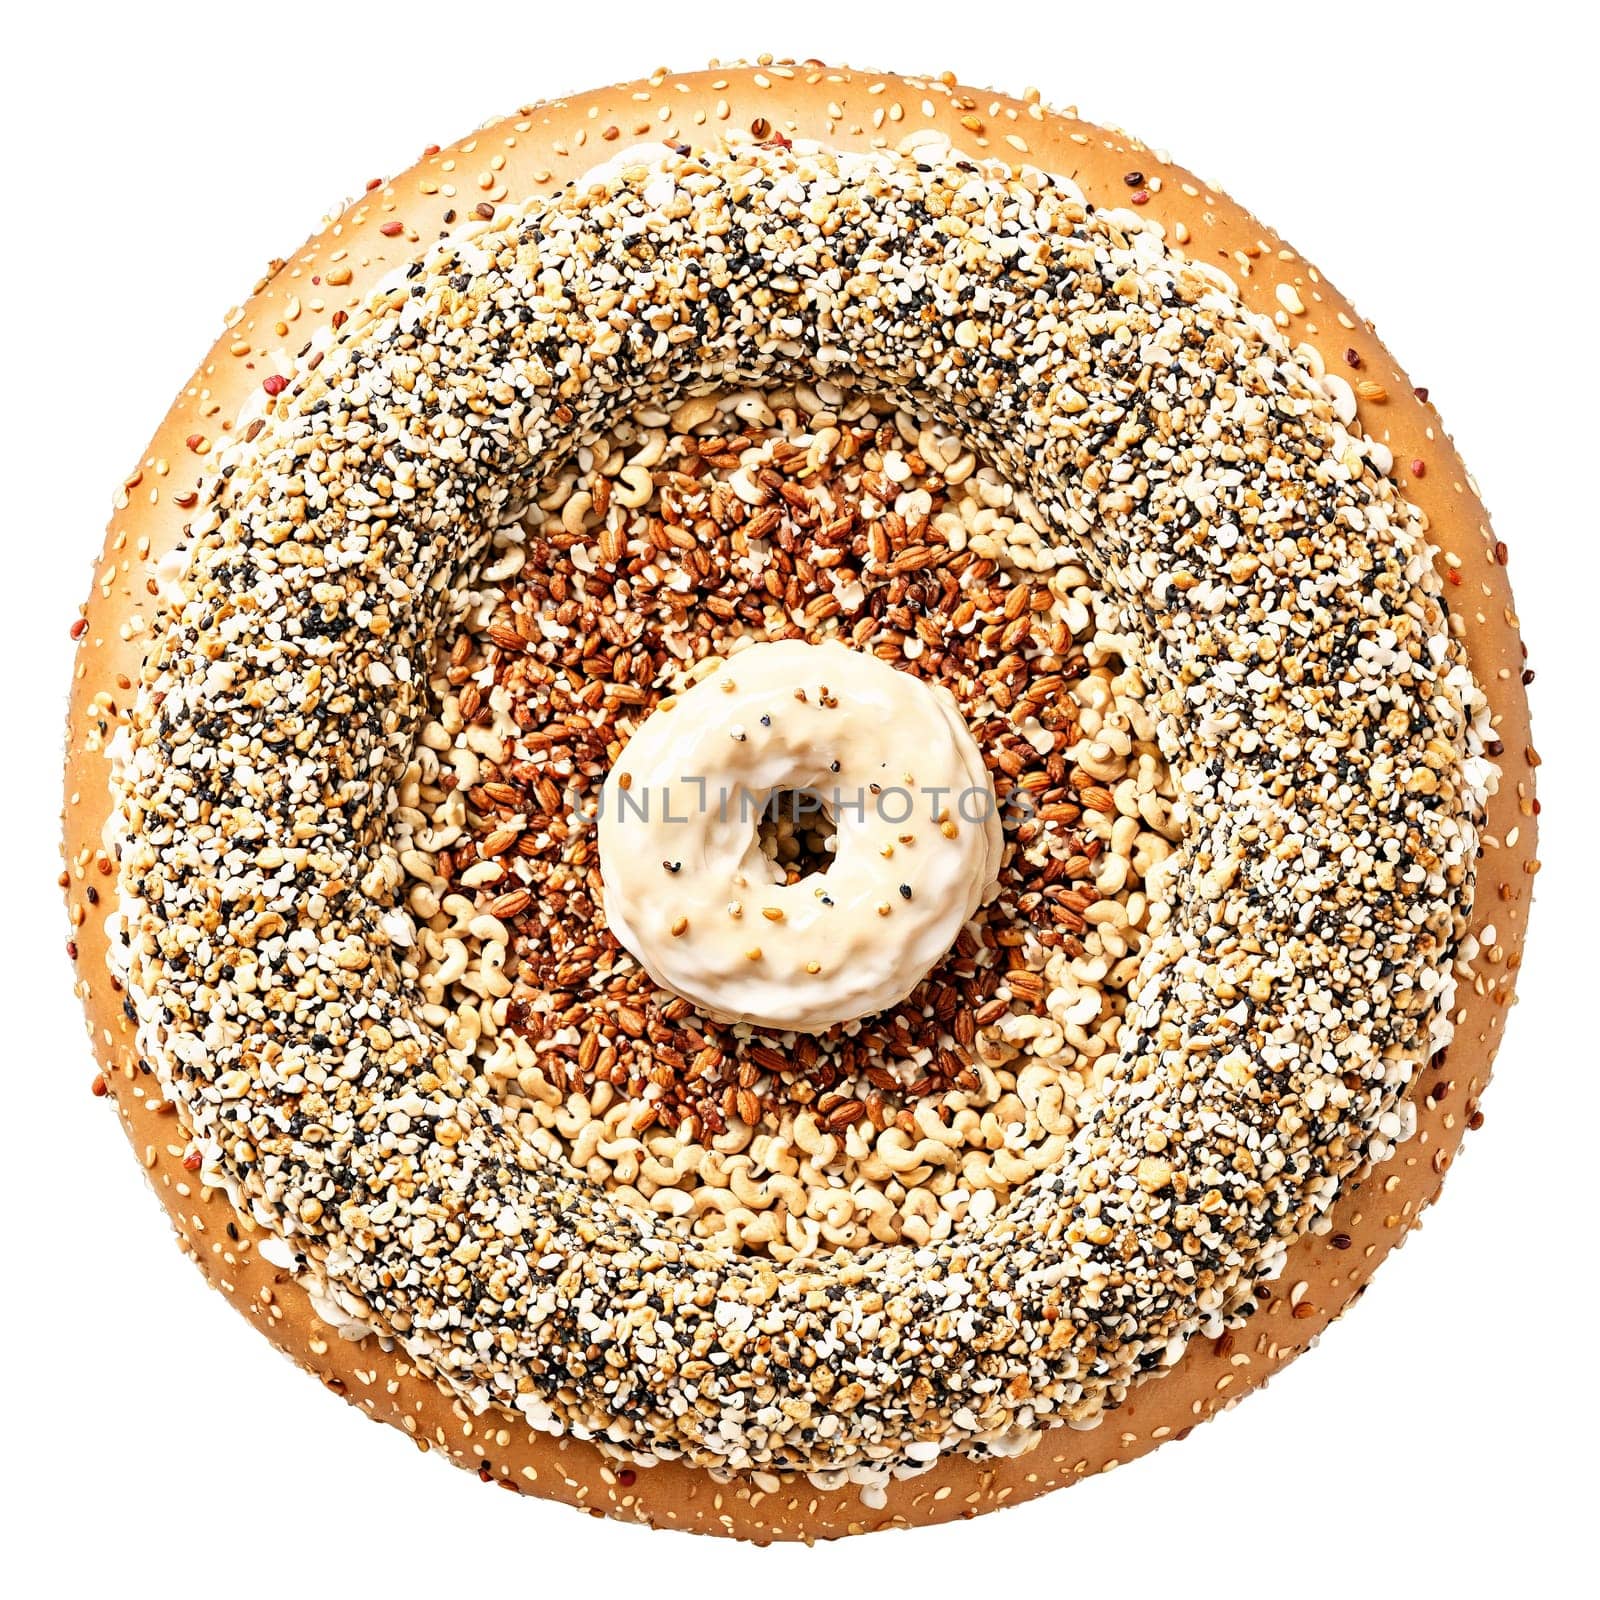 Everything bagel nut mix mandala hovering nuts with everything bagel seasoning Food and culinary concept by panophotograph